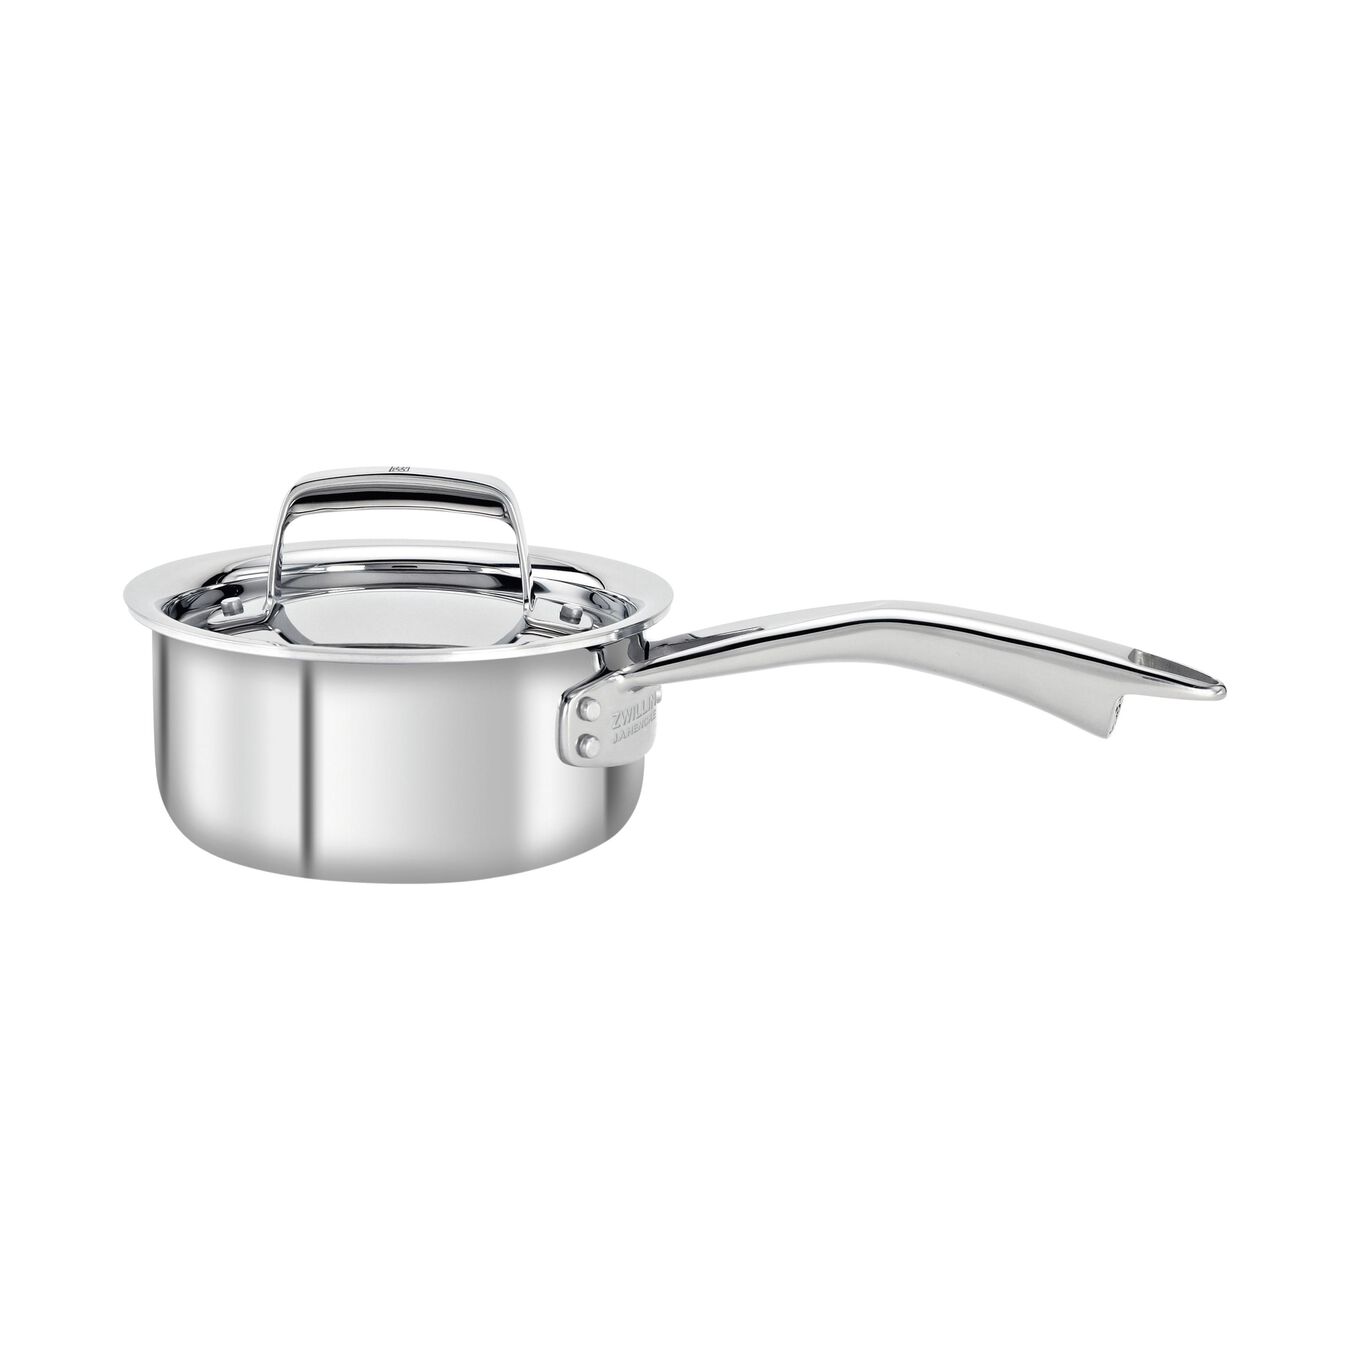 900 ml 18/10 Stainless Steel round Sauce pan with lid,,large 1